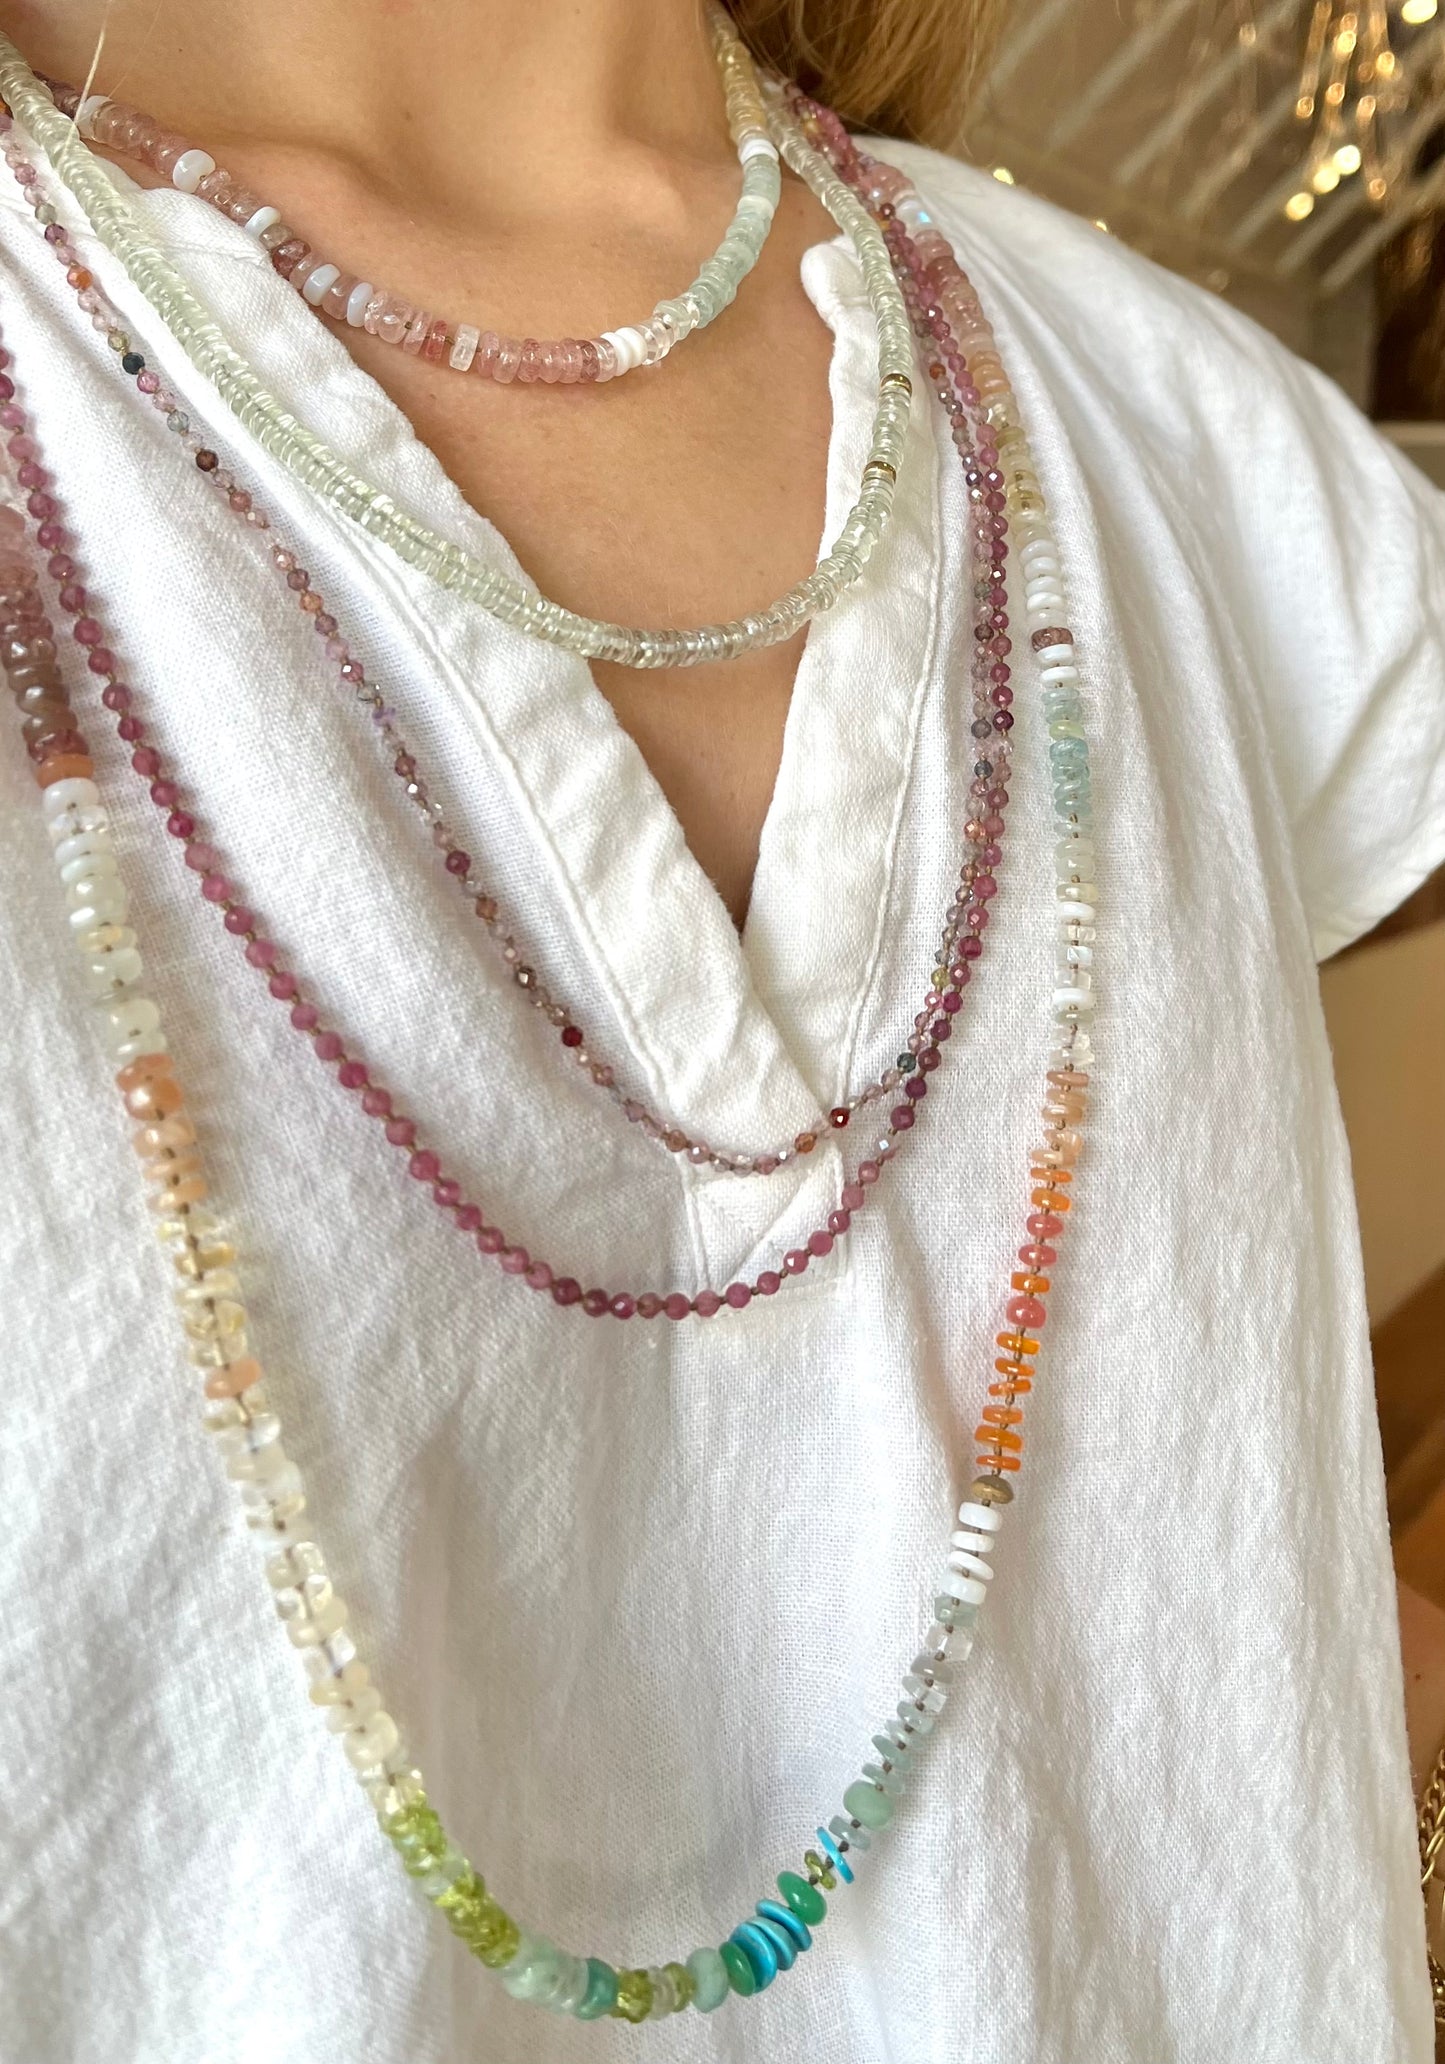 35" Knotted Gemstone Mix Necklace